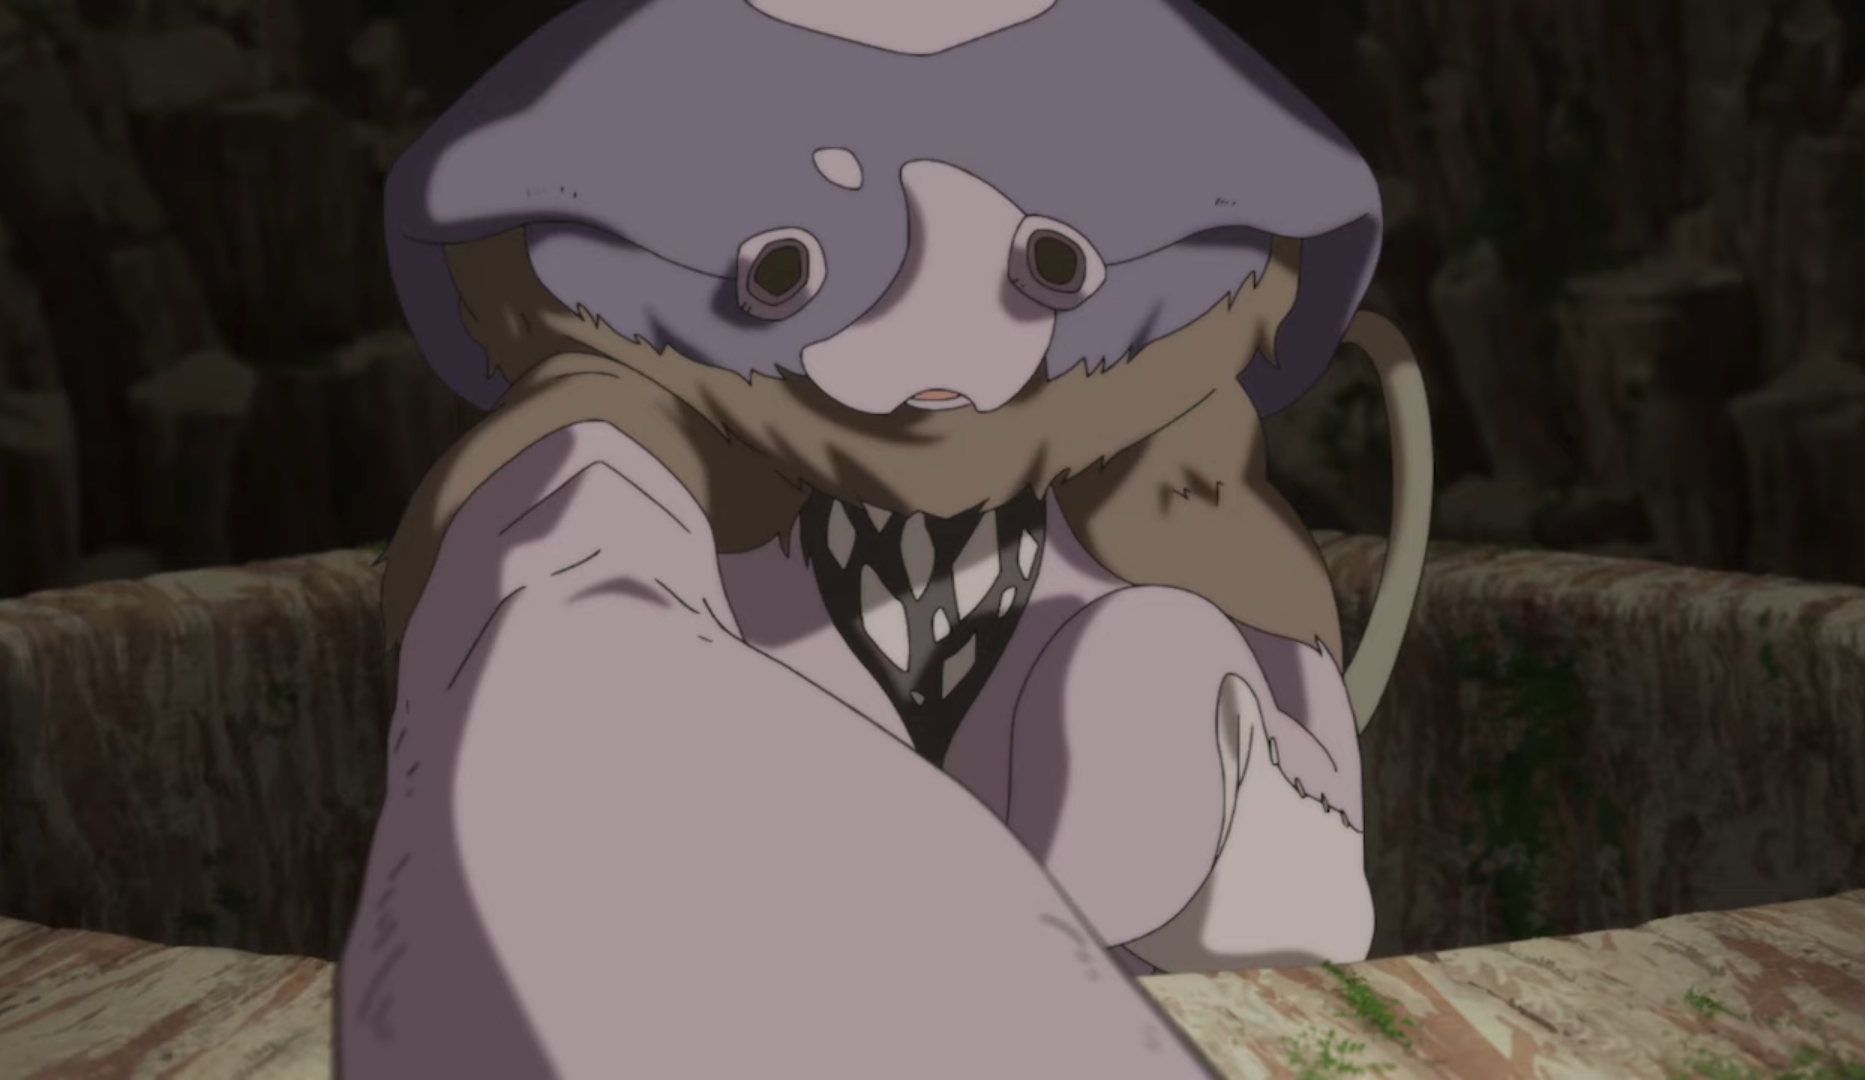 Made in Abyss Episode 05, Made in Abyss Wiki